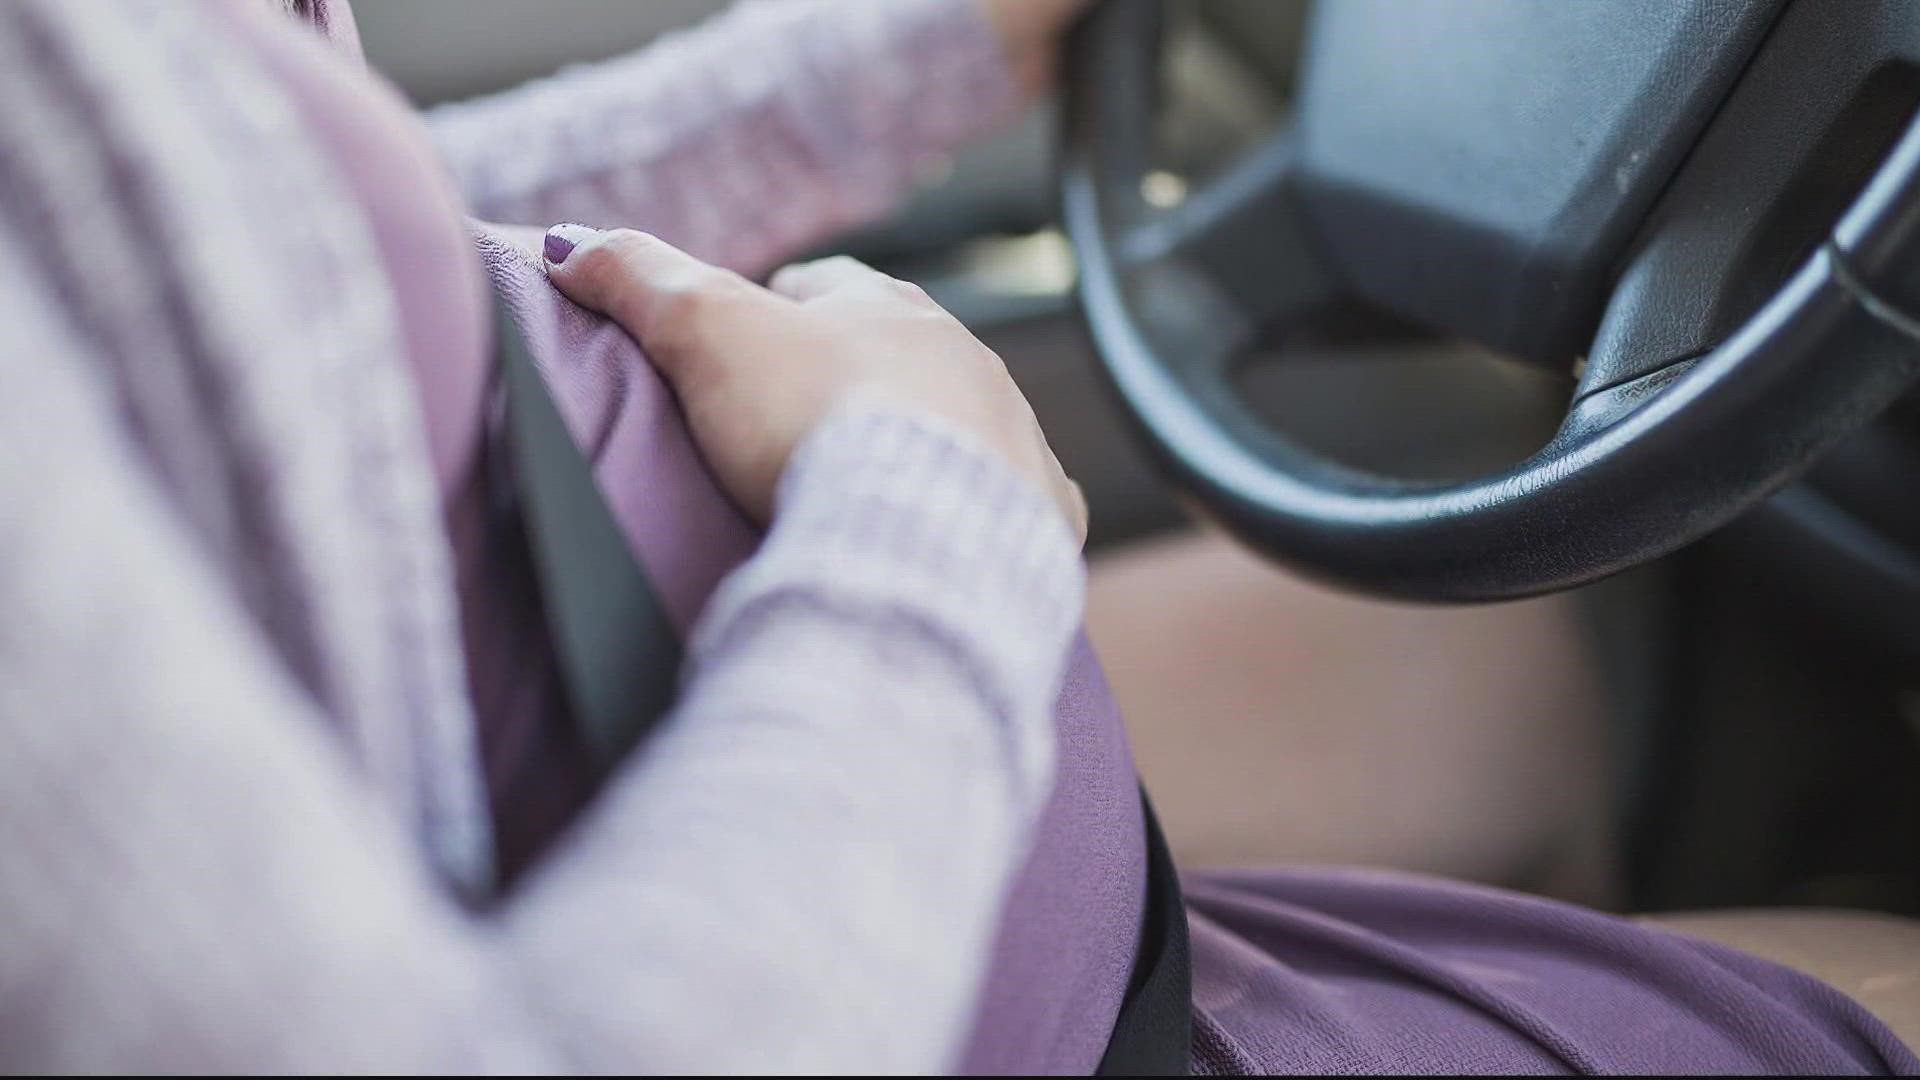 Mom Accident Pregnant Porn Videos - Pregnant woman's fetus counts as a person in carpool lanes, proposed  Virginia bill says | wusa9.com